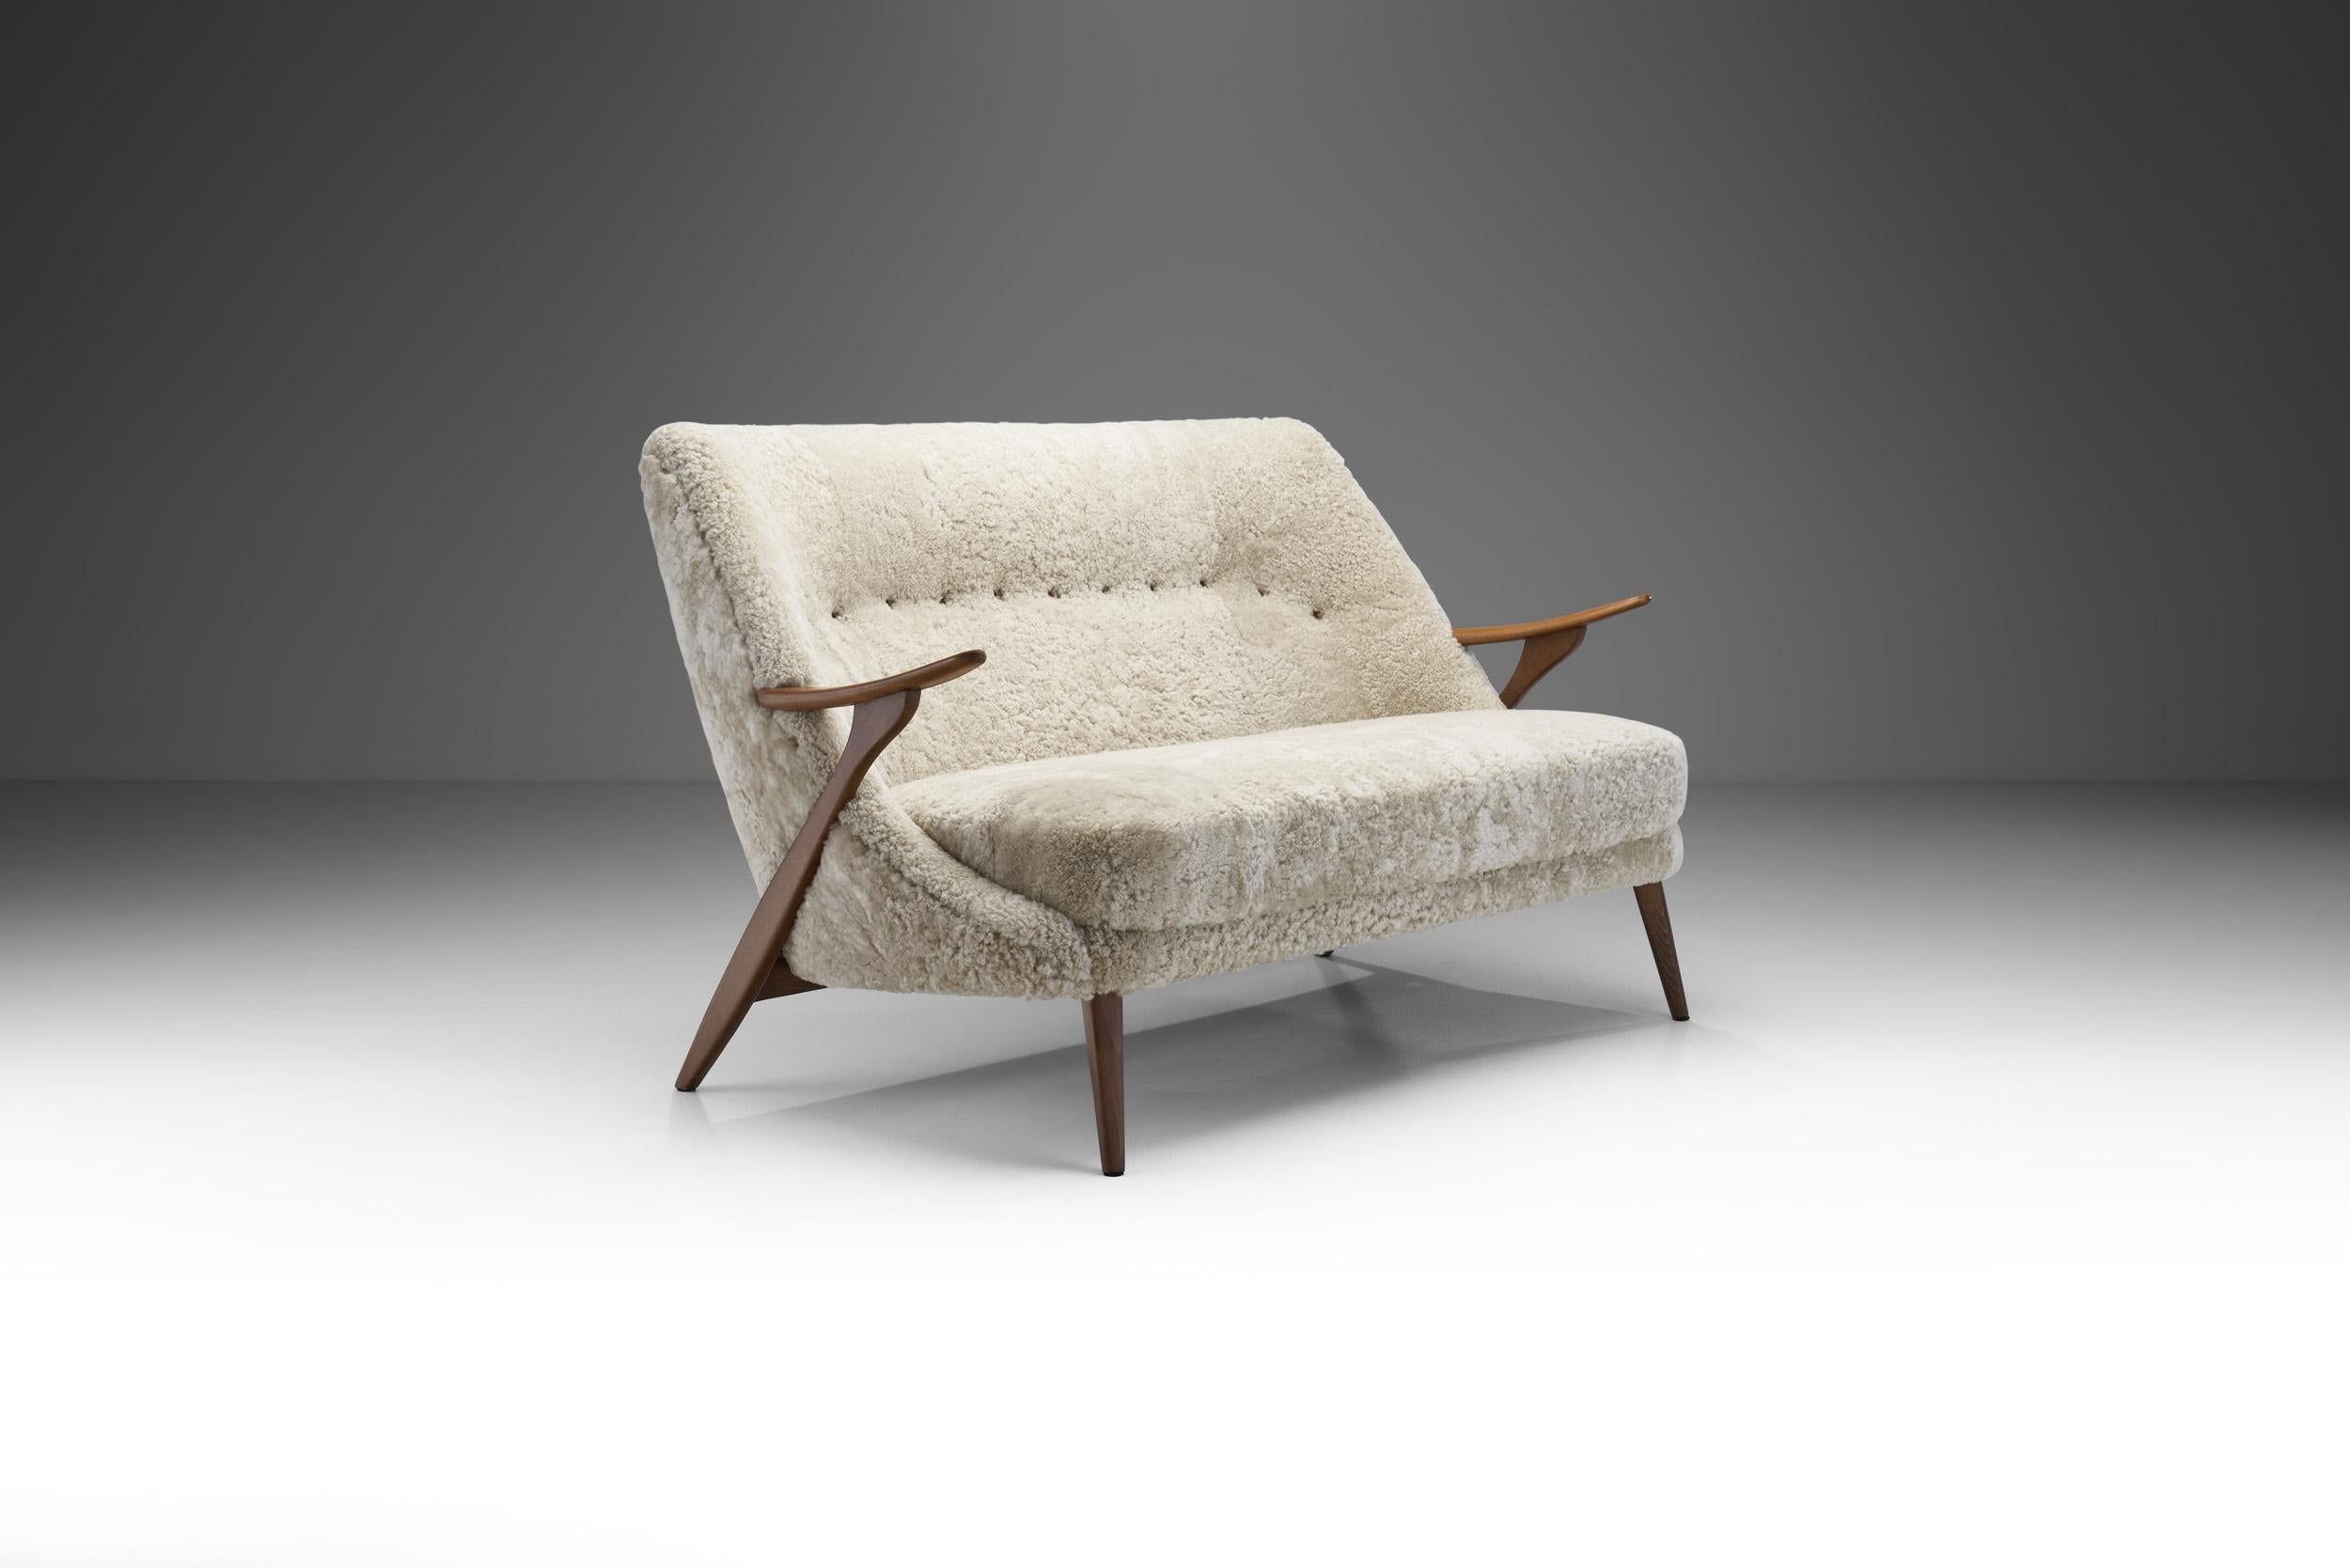 This spectacular two-seater sofa by Swedish designer, Svante Skogh, is a rather rare example of the interior and furniture designer’s repertoire. With a creative and masterfully crafted wooden structure and fully upholstered body, this model